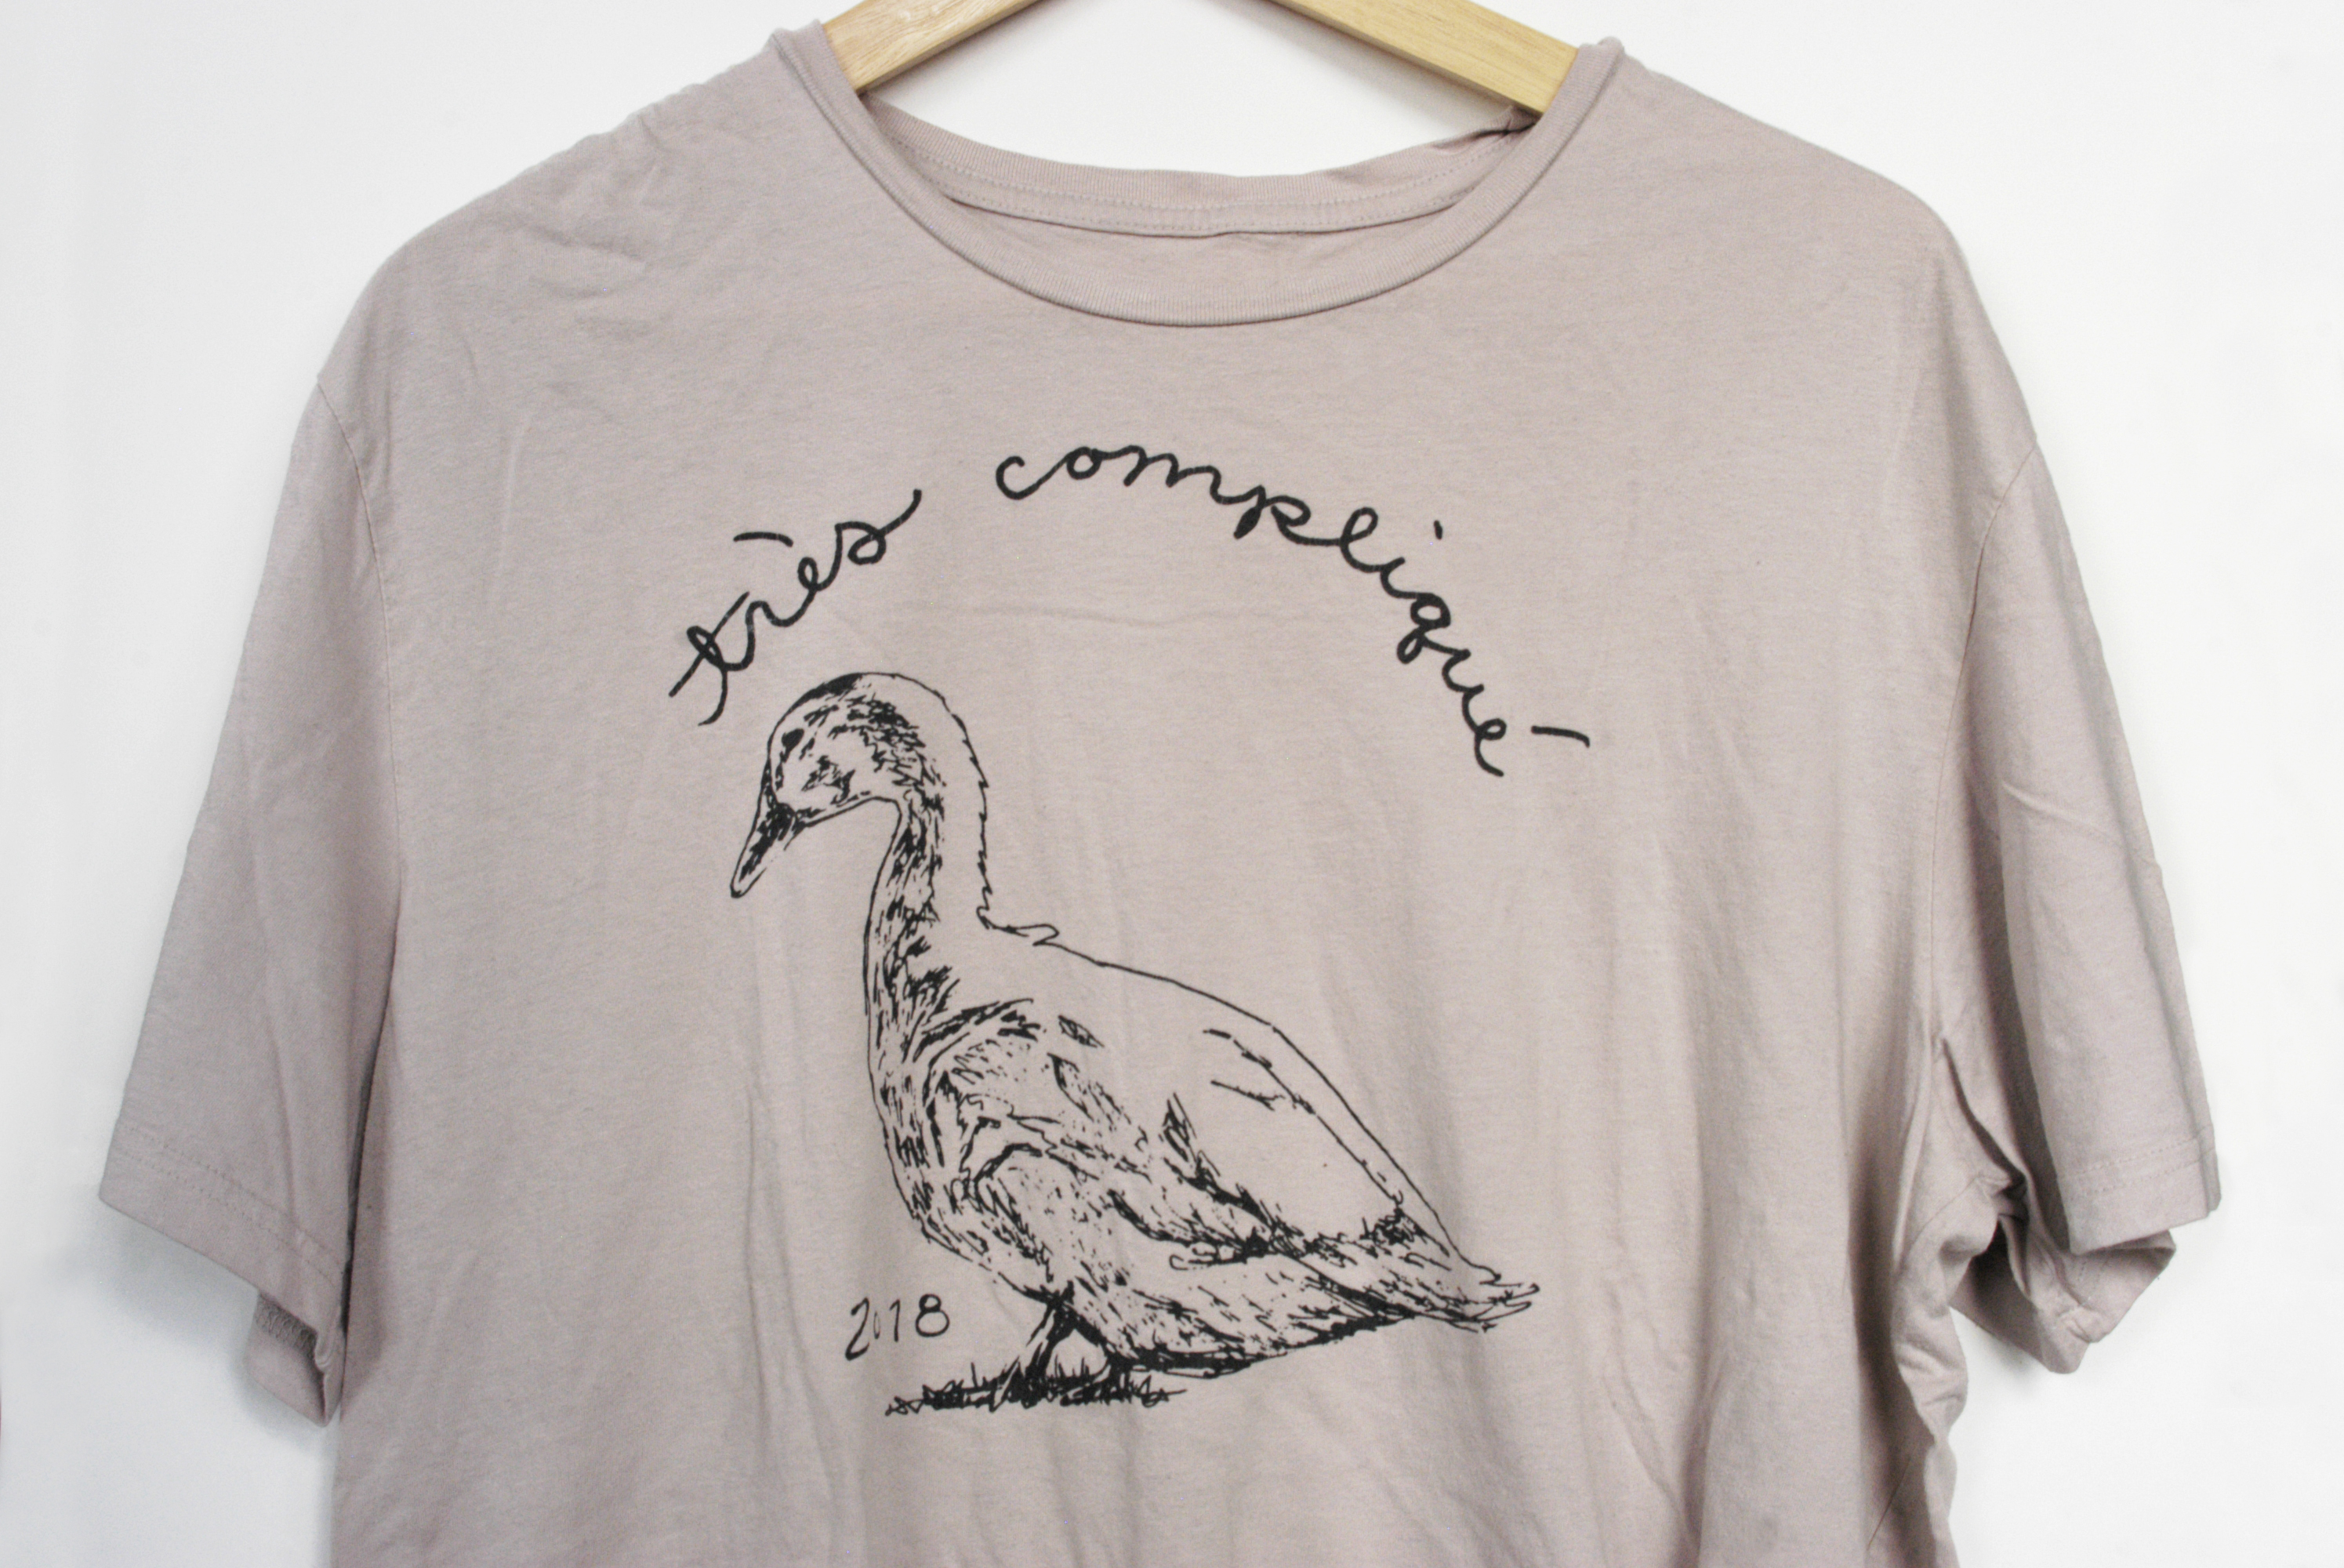 Drawing of a duck screenprinted on a shirt